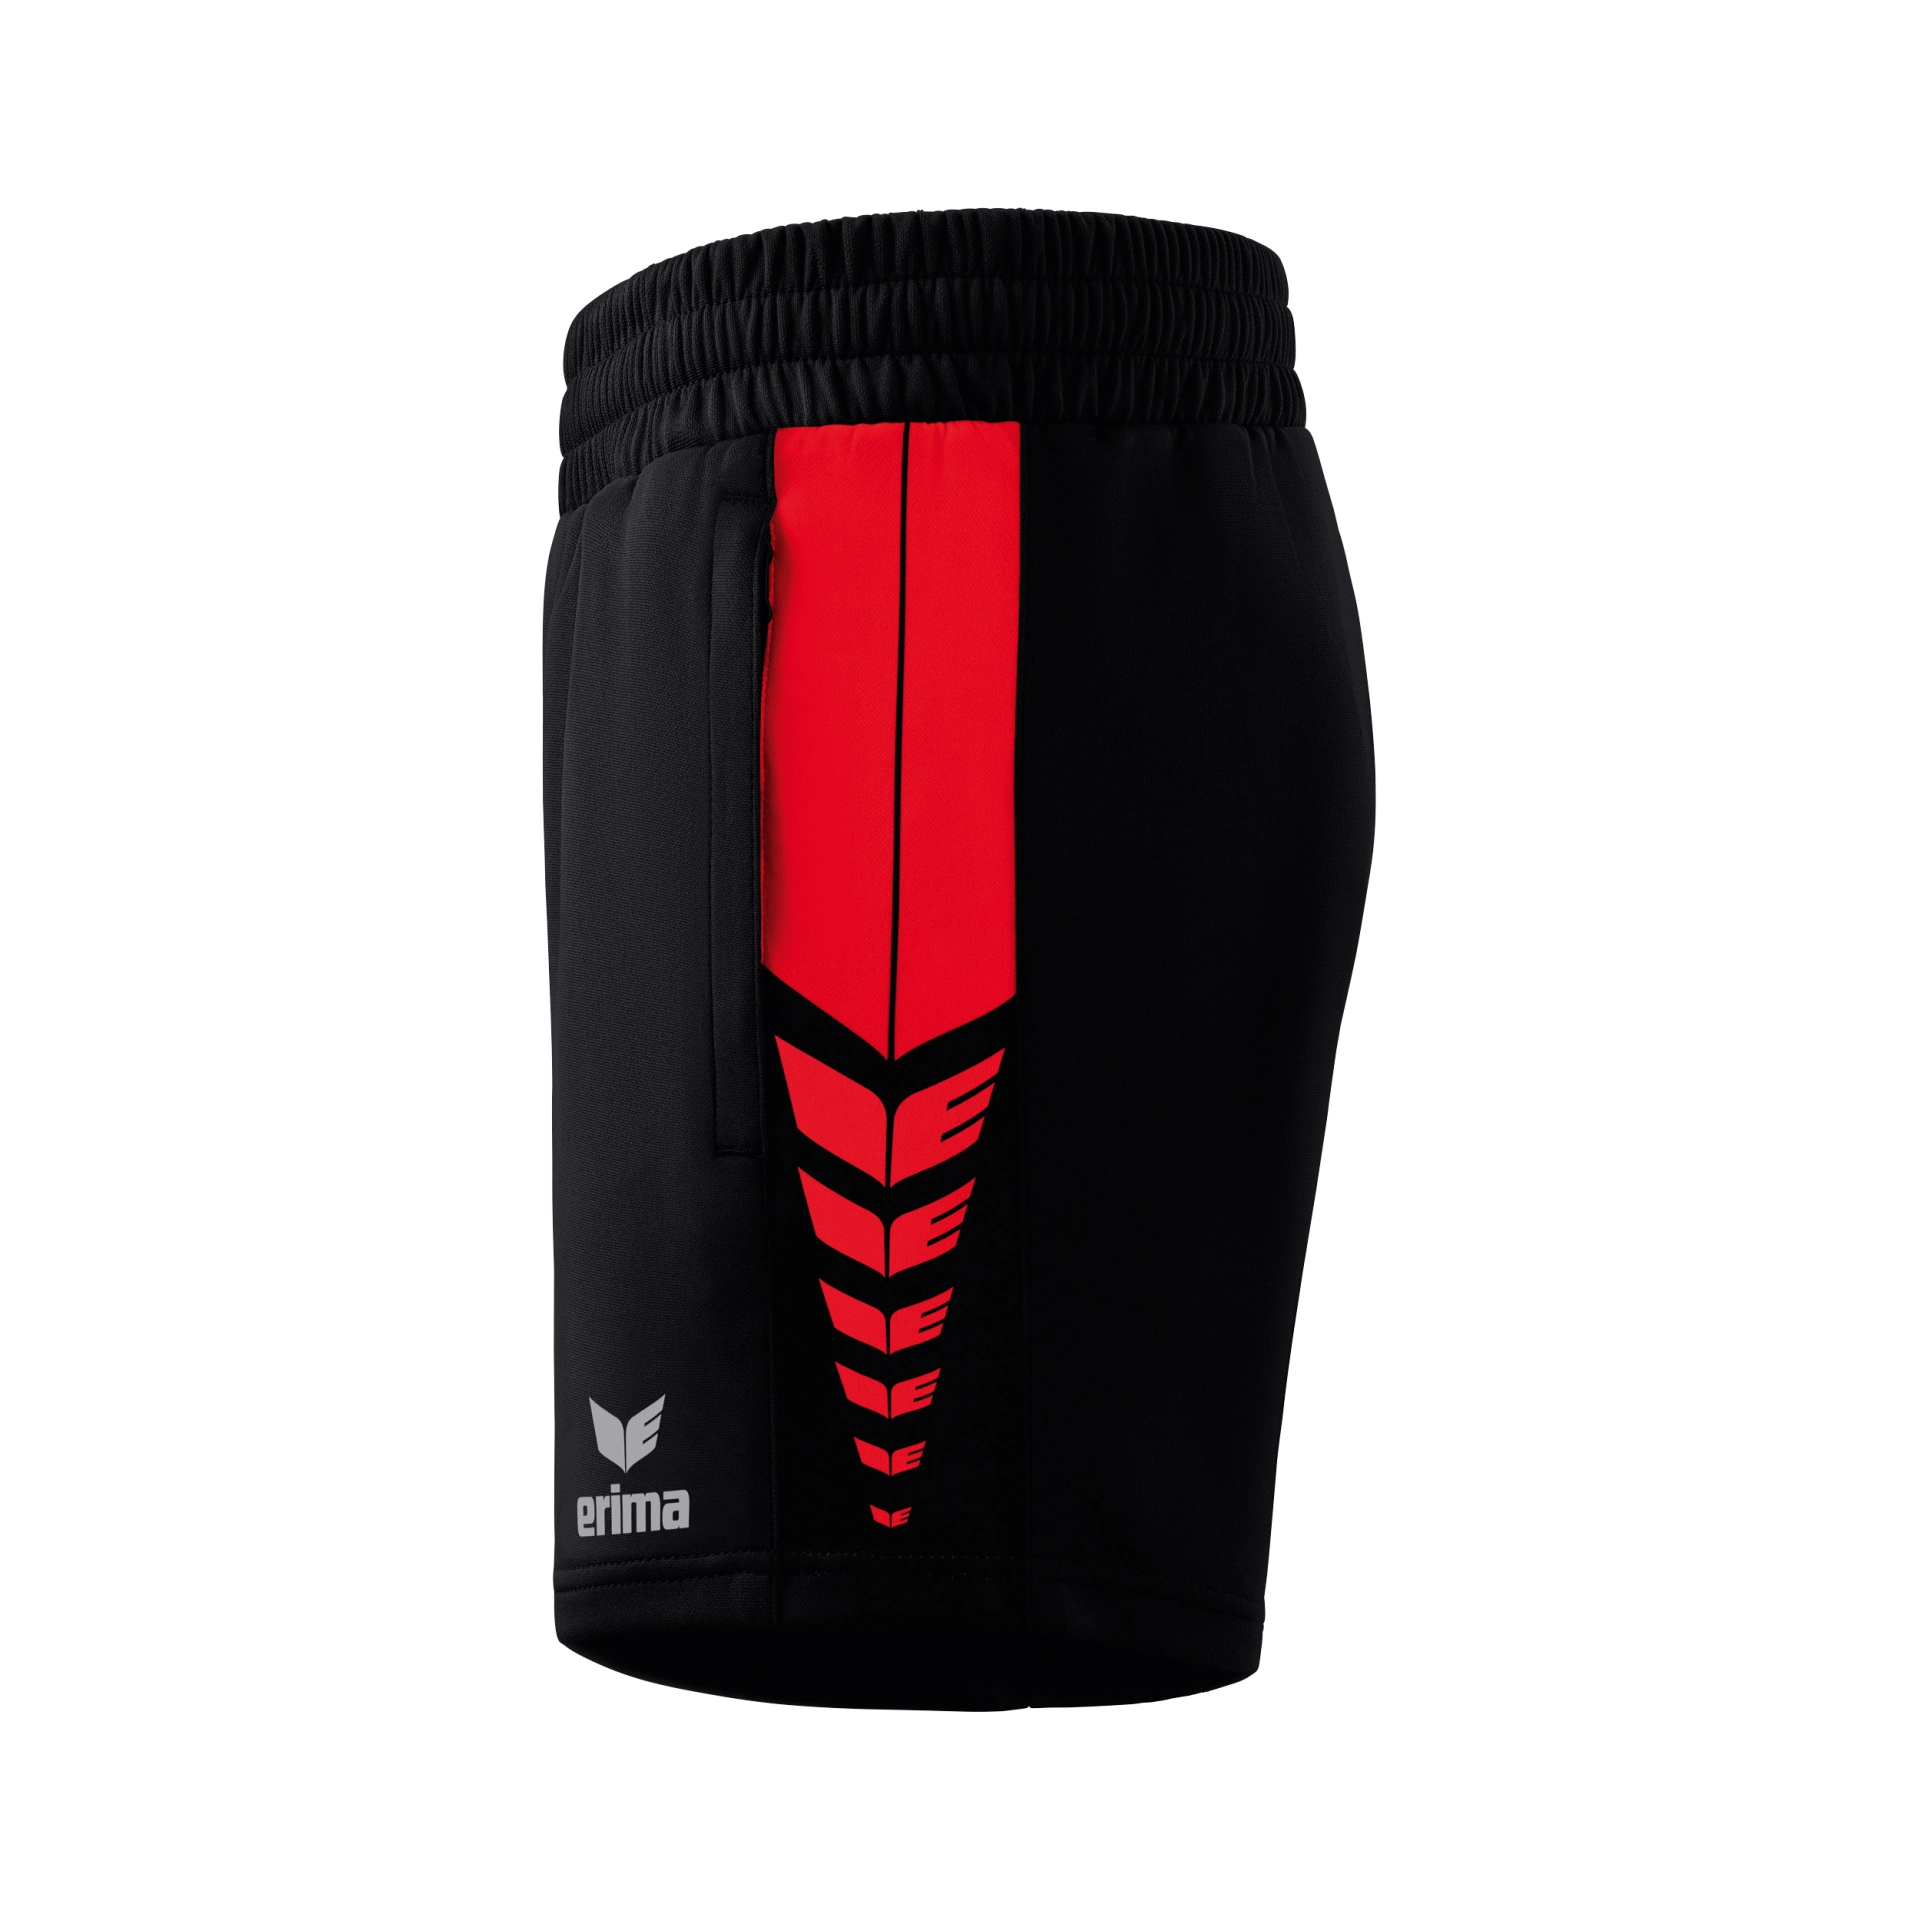 ERIMA Six_Wings_Worker_Shorts 1152201 950250 black/red